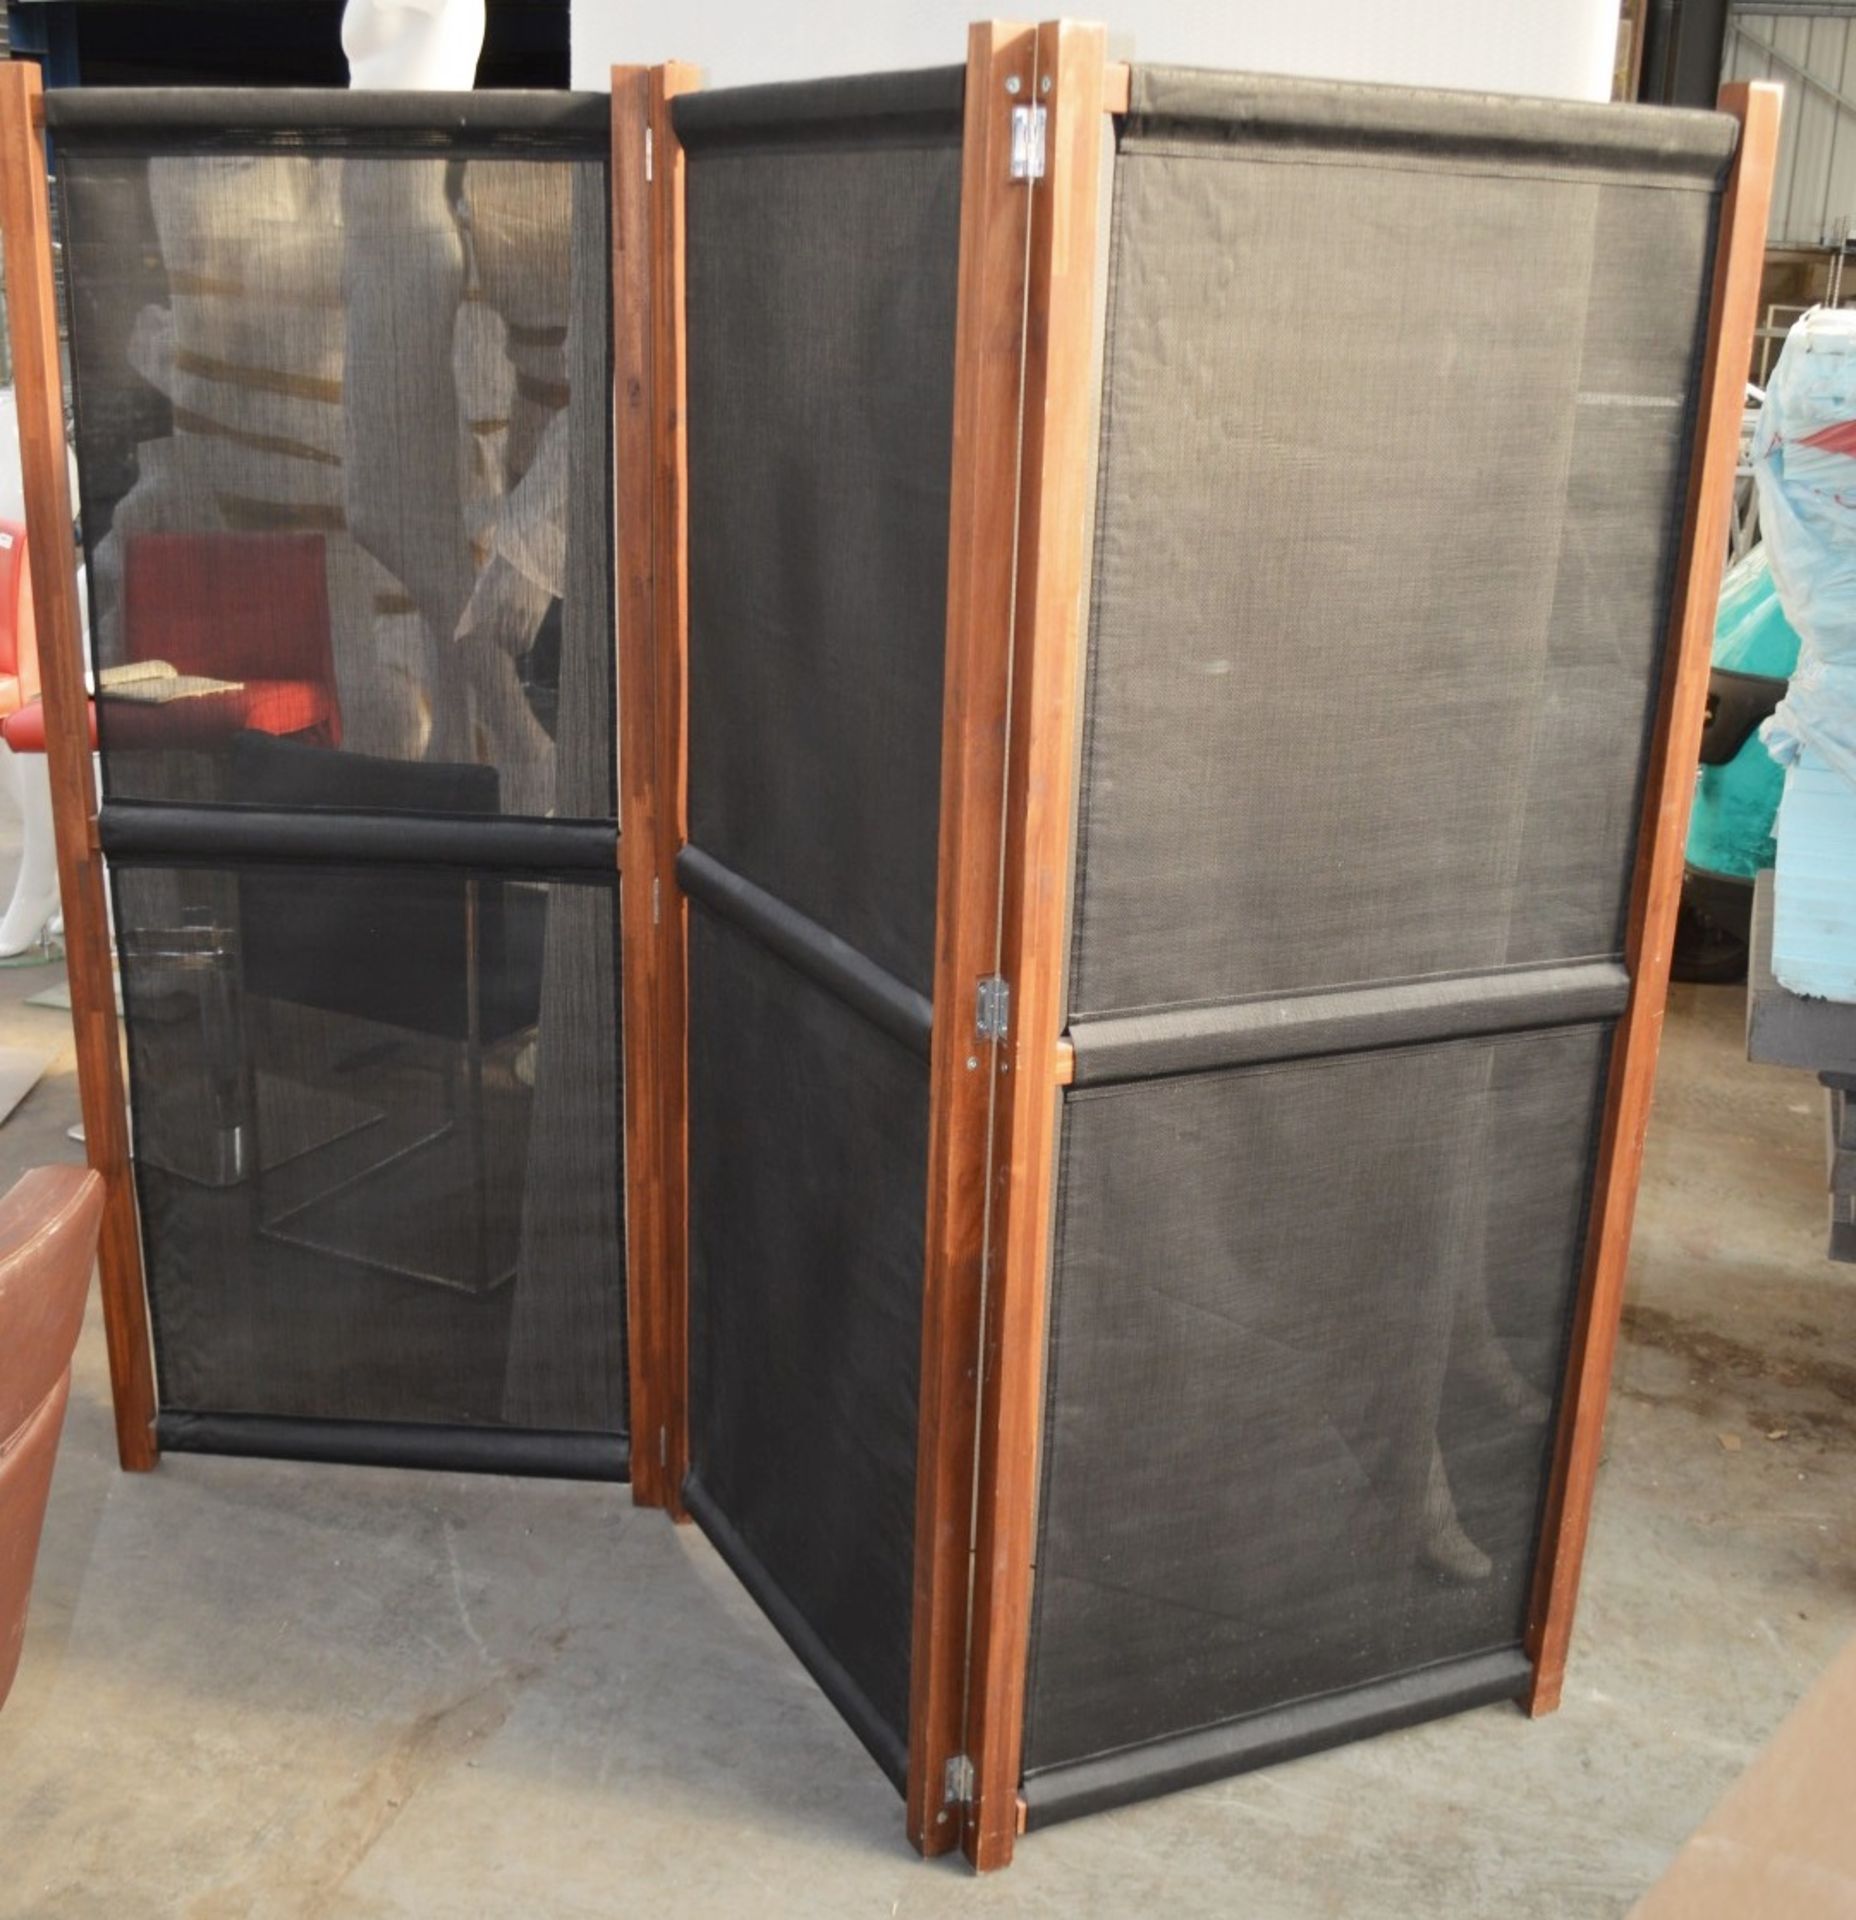 1 x 3-Panel Dressing Screen / Divider  - Dimensions (approx): H180 x W135cm - Ref: MHB115 - Image 2 of 4